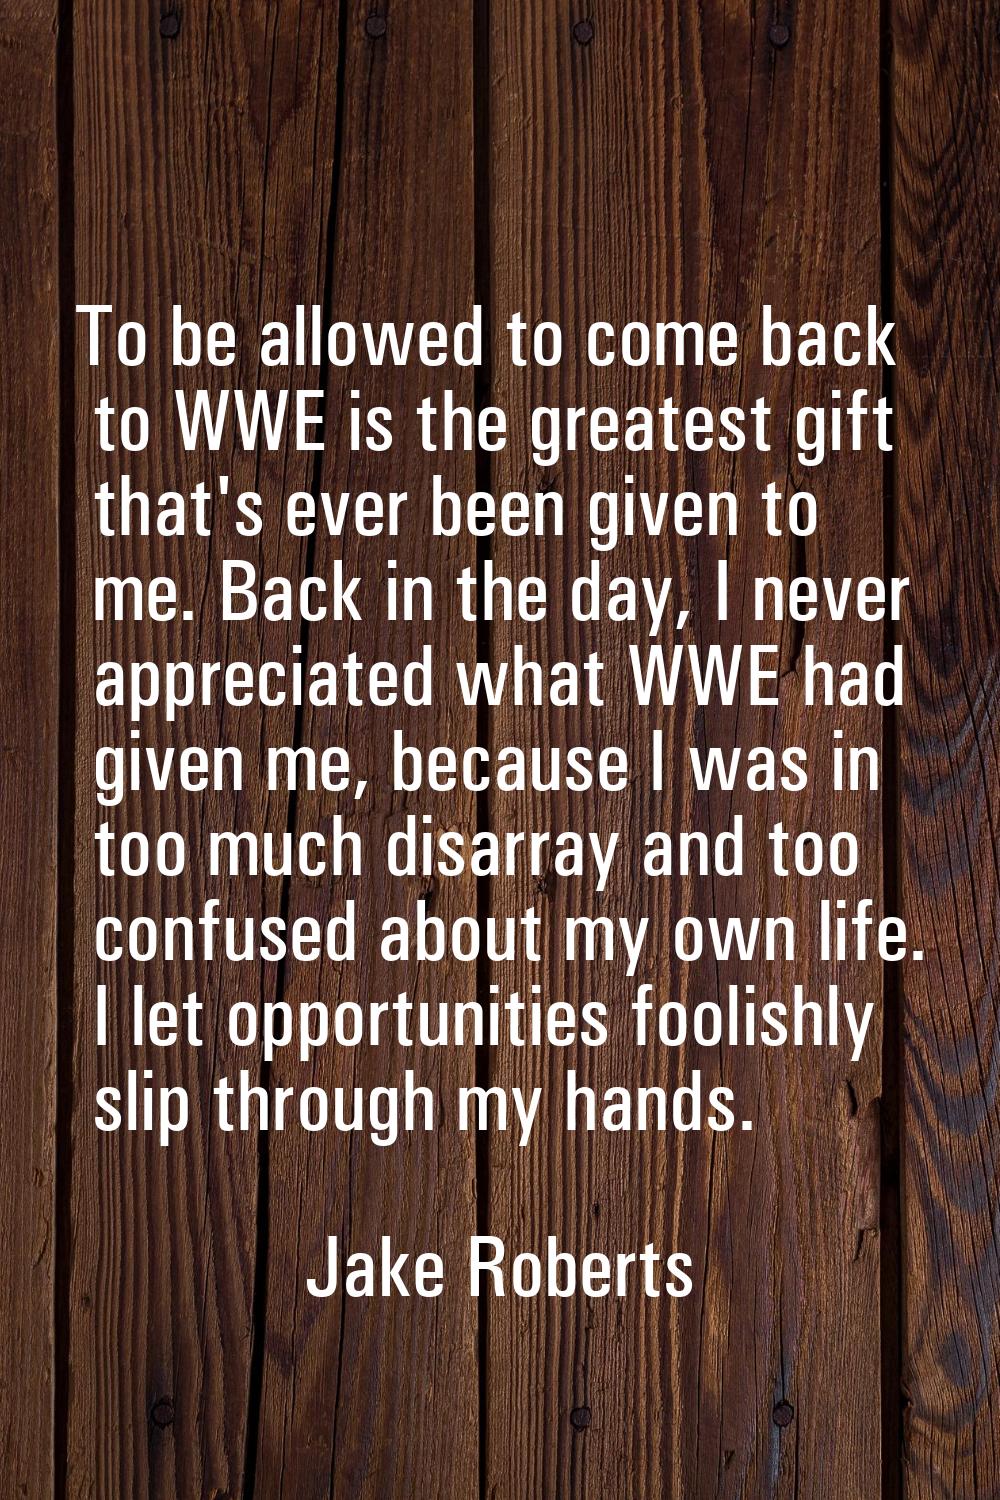 To be allowed to come back to WWE is the greatest gift that's ever been given to me. Back in the da